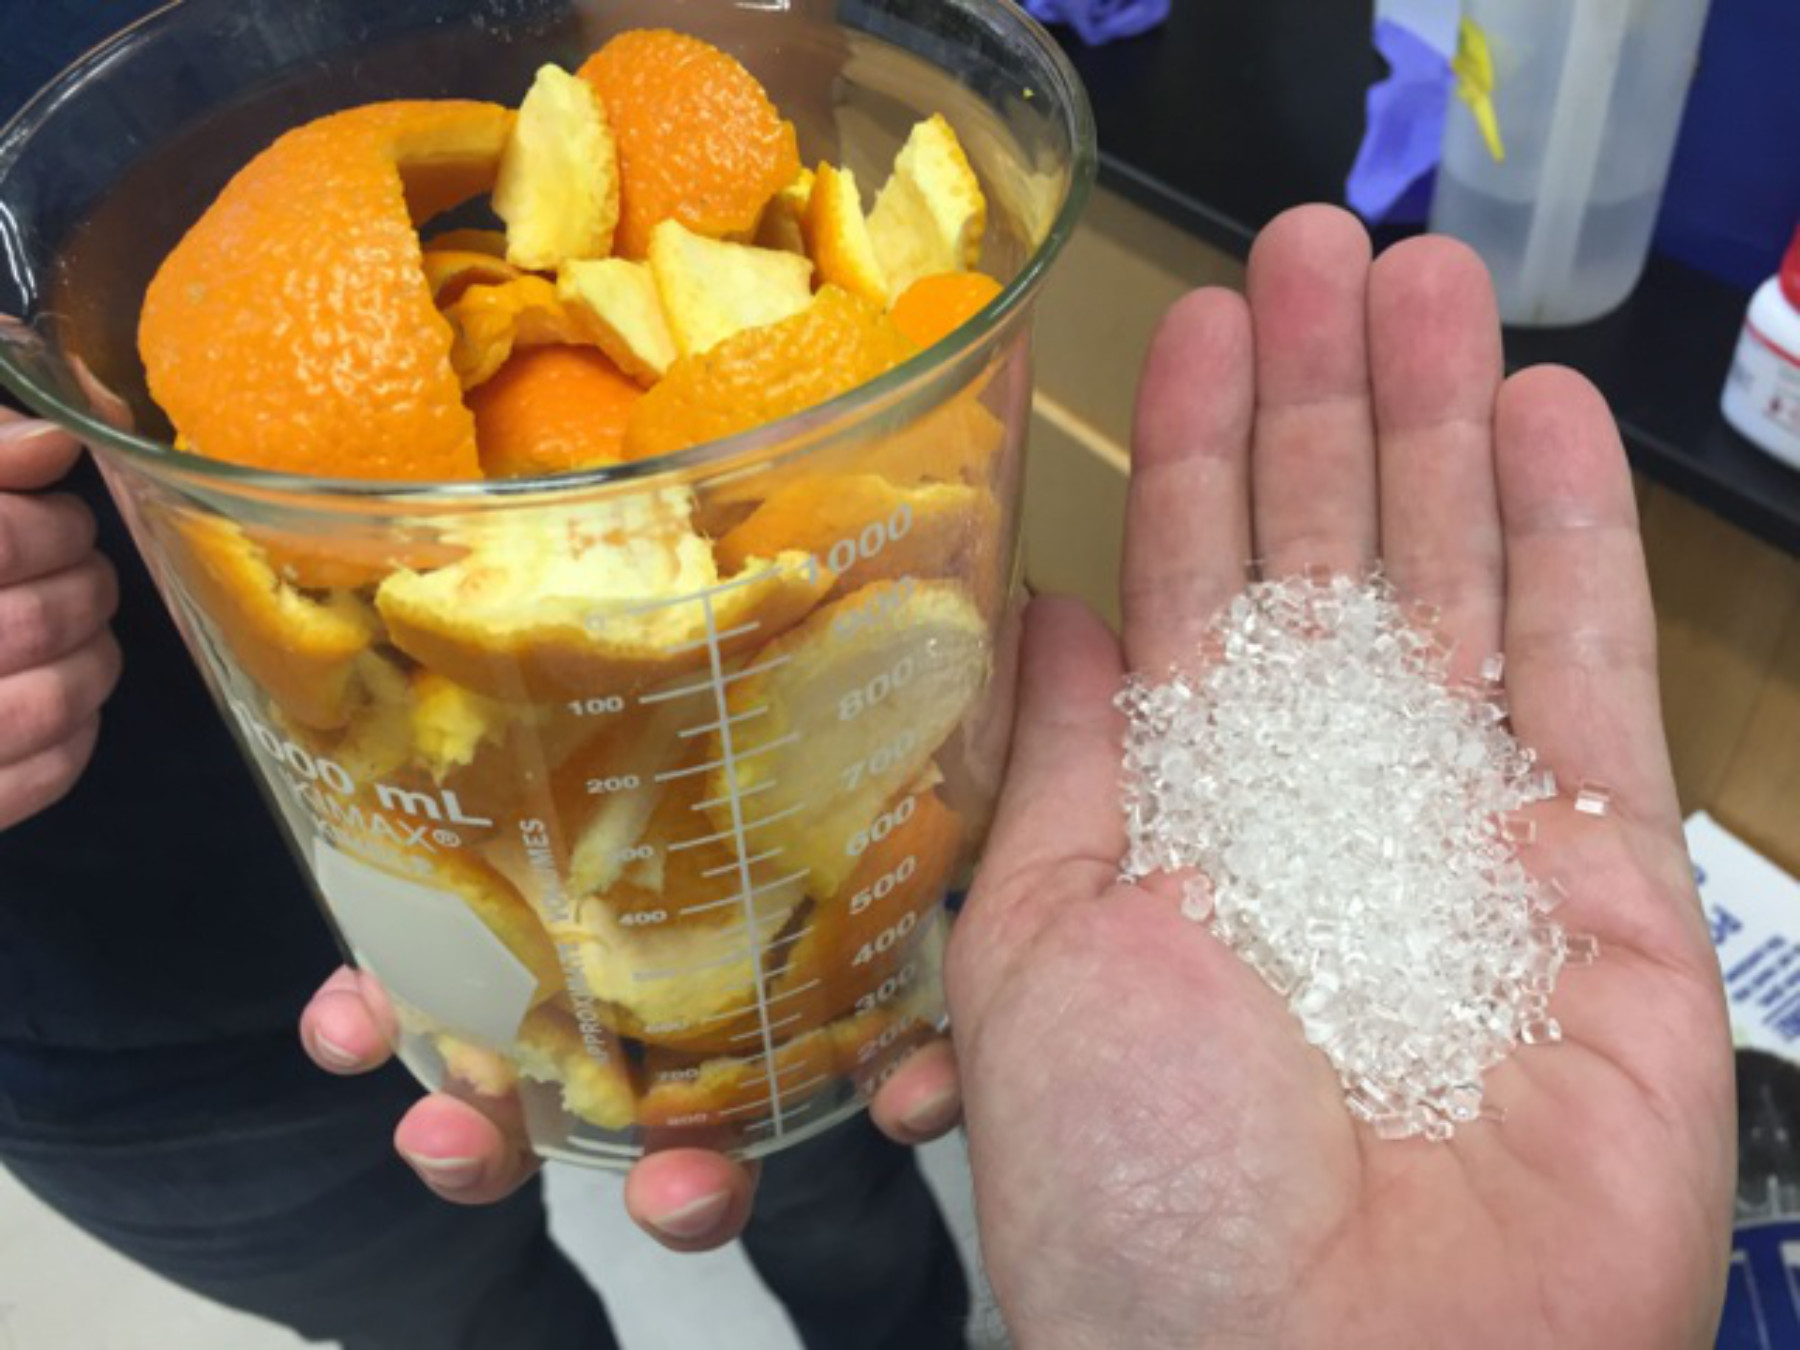 Photo of a person's hand holding polymers created by combining CO2 with limonene from orange peels (the photos also shows a container of orange peels ).